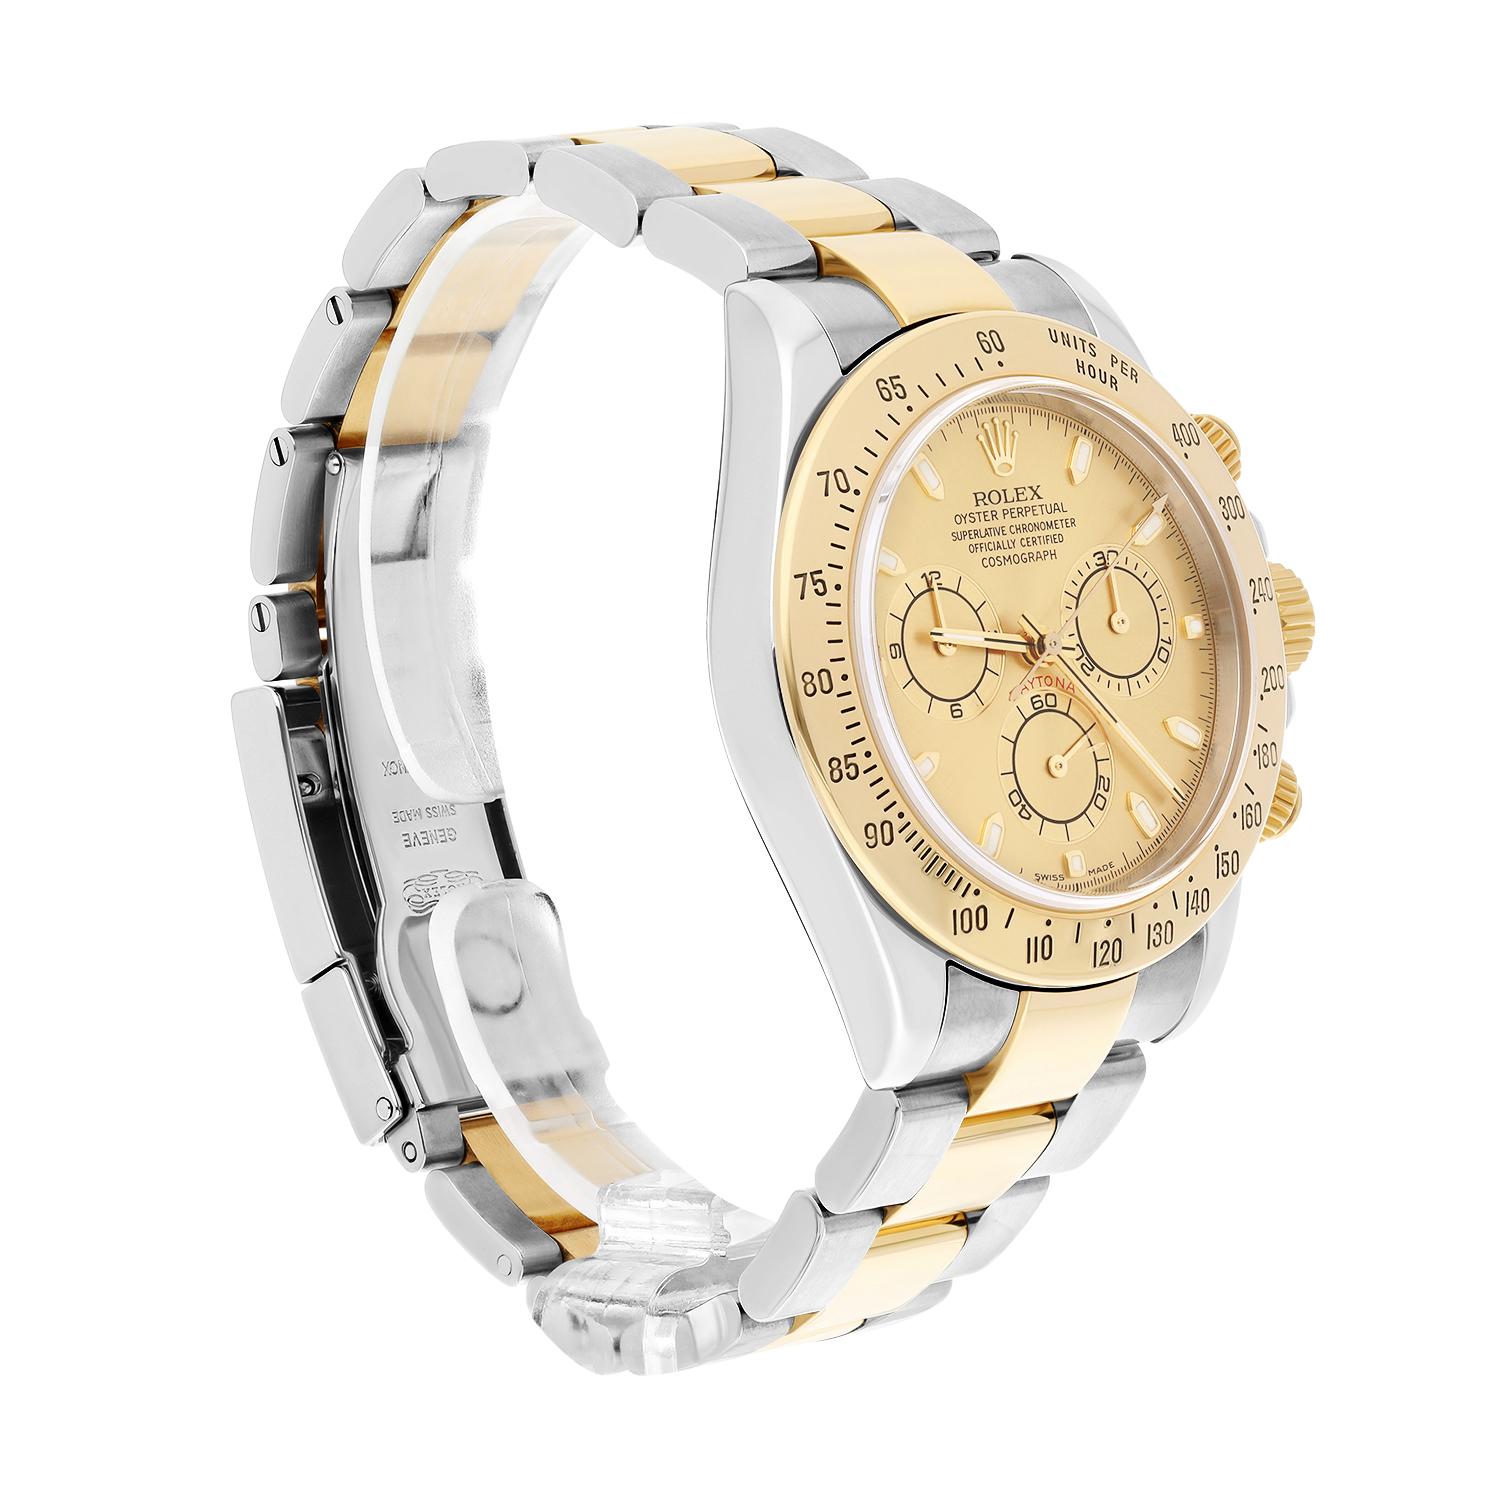 Men's Rolex Daytona Stainless Steel & Yellow Gold Champagne Dial Mens Watch 116523